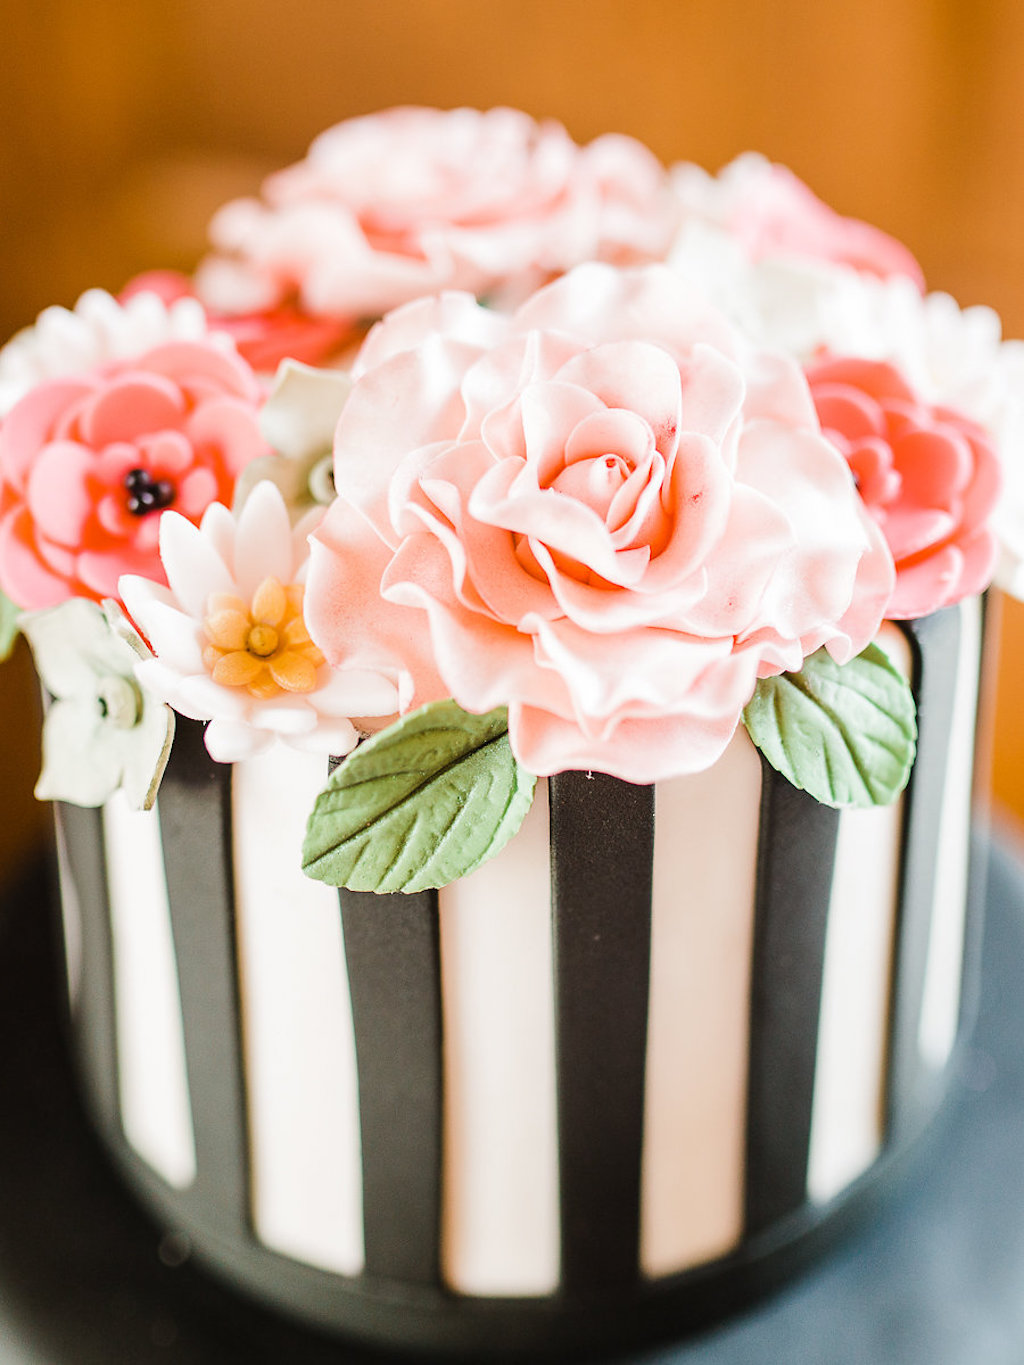 Kate Spade Inspired Round Wedding Cake with Black and White Vertical Striped Fondant, Pink Icing Flowers with Greenery